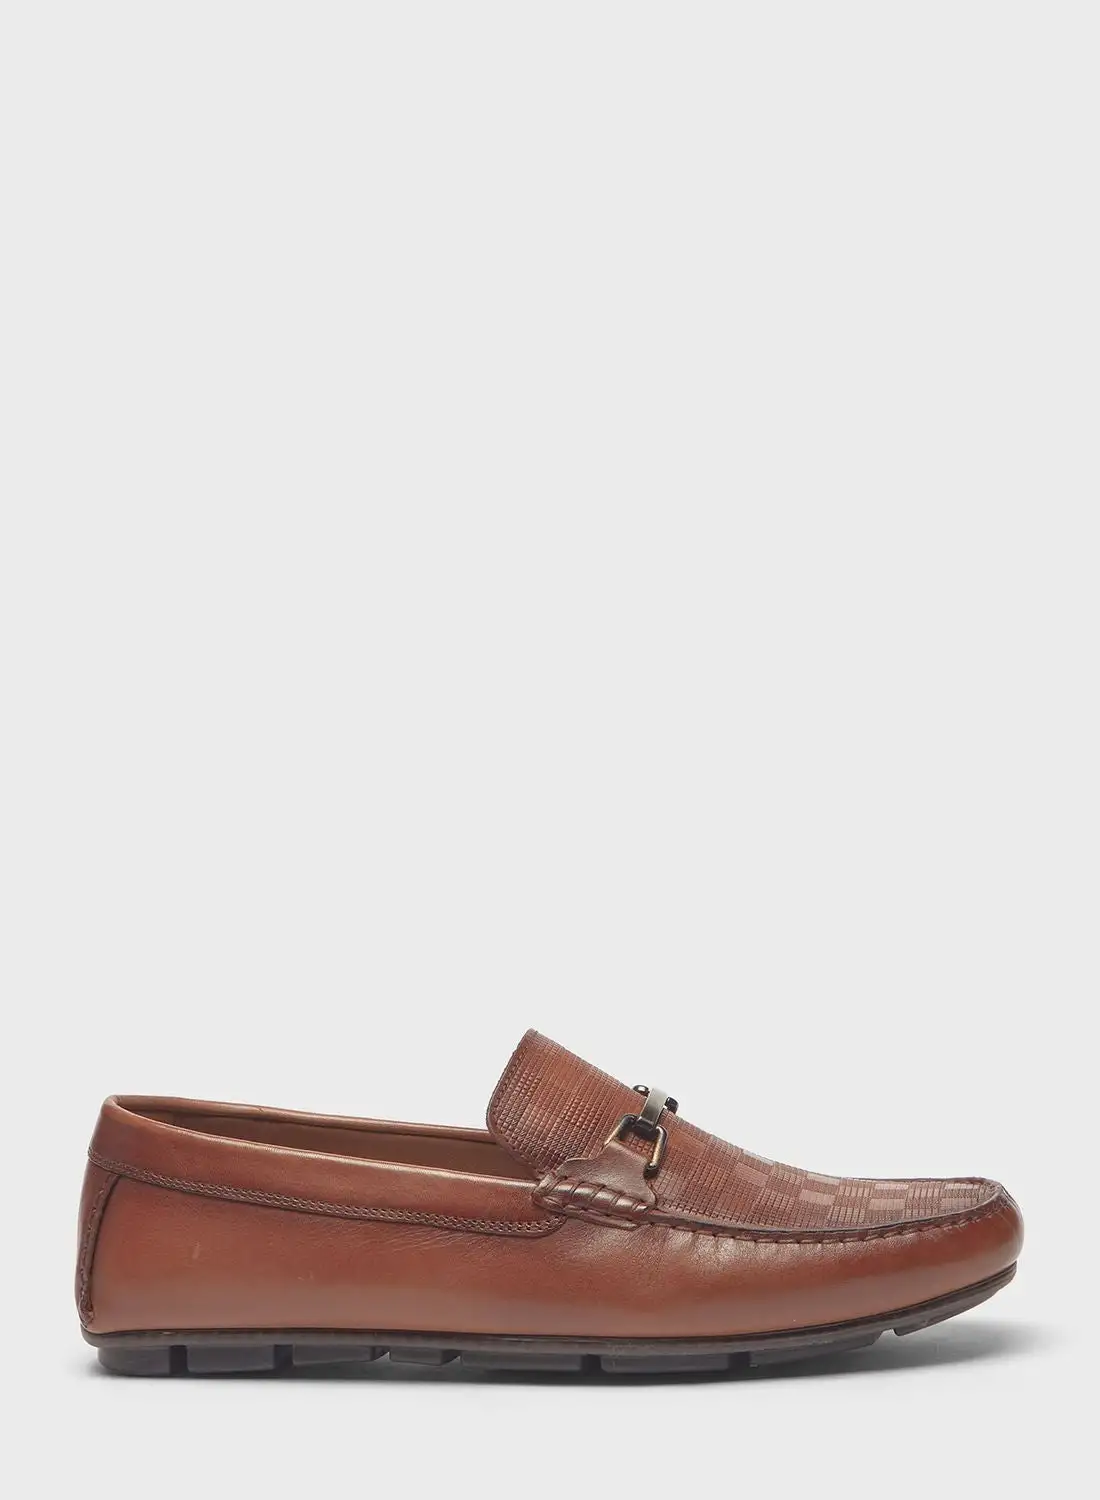 DUCHINI Casual Slip Ons Loafers